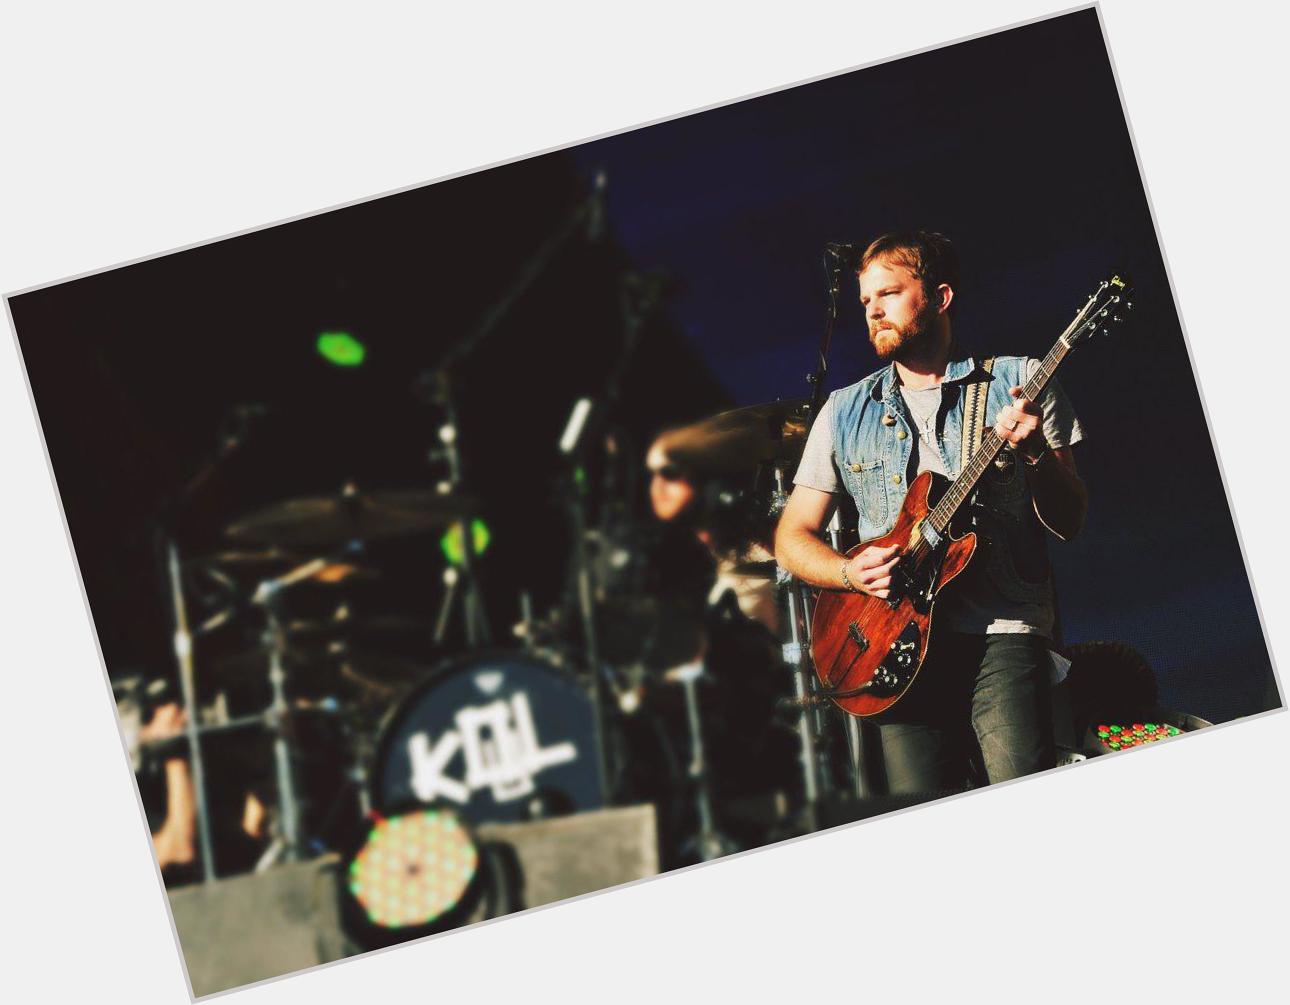 And also happy birthday to the man who gets to be the voice of the coolest band in the world, Caleb Followill <3 